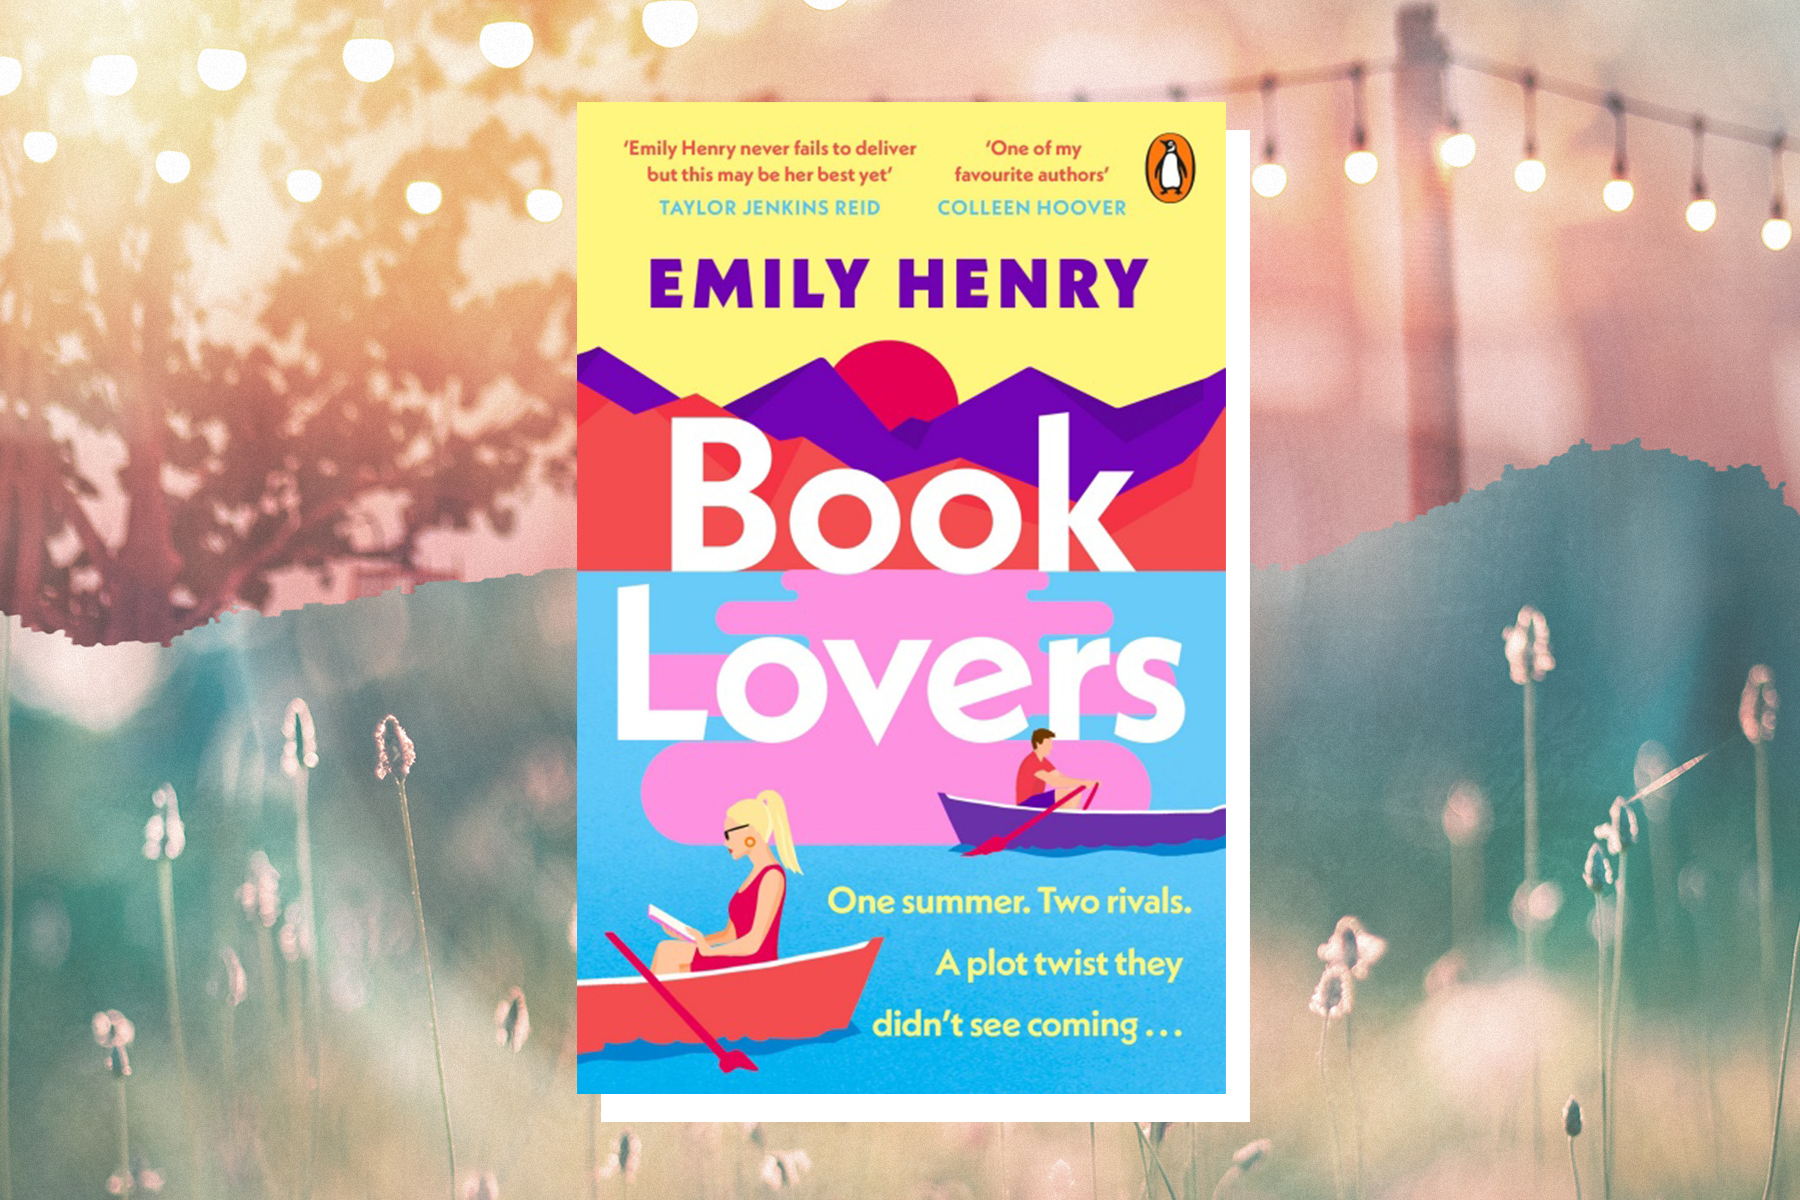 An image of Emily Henry's novel Book Lovers against a colourful backdrop.